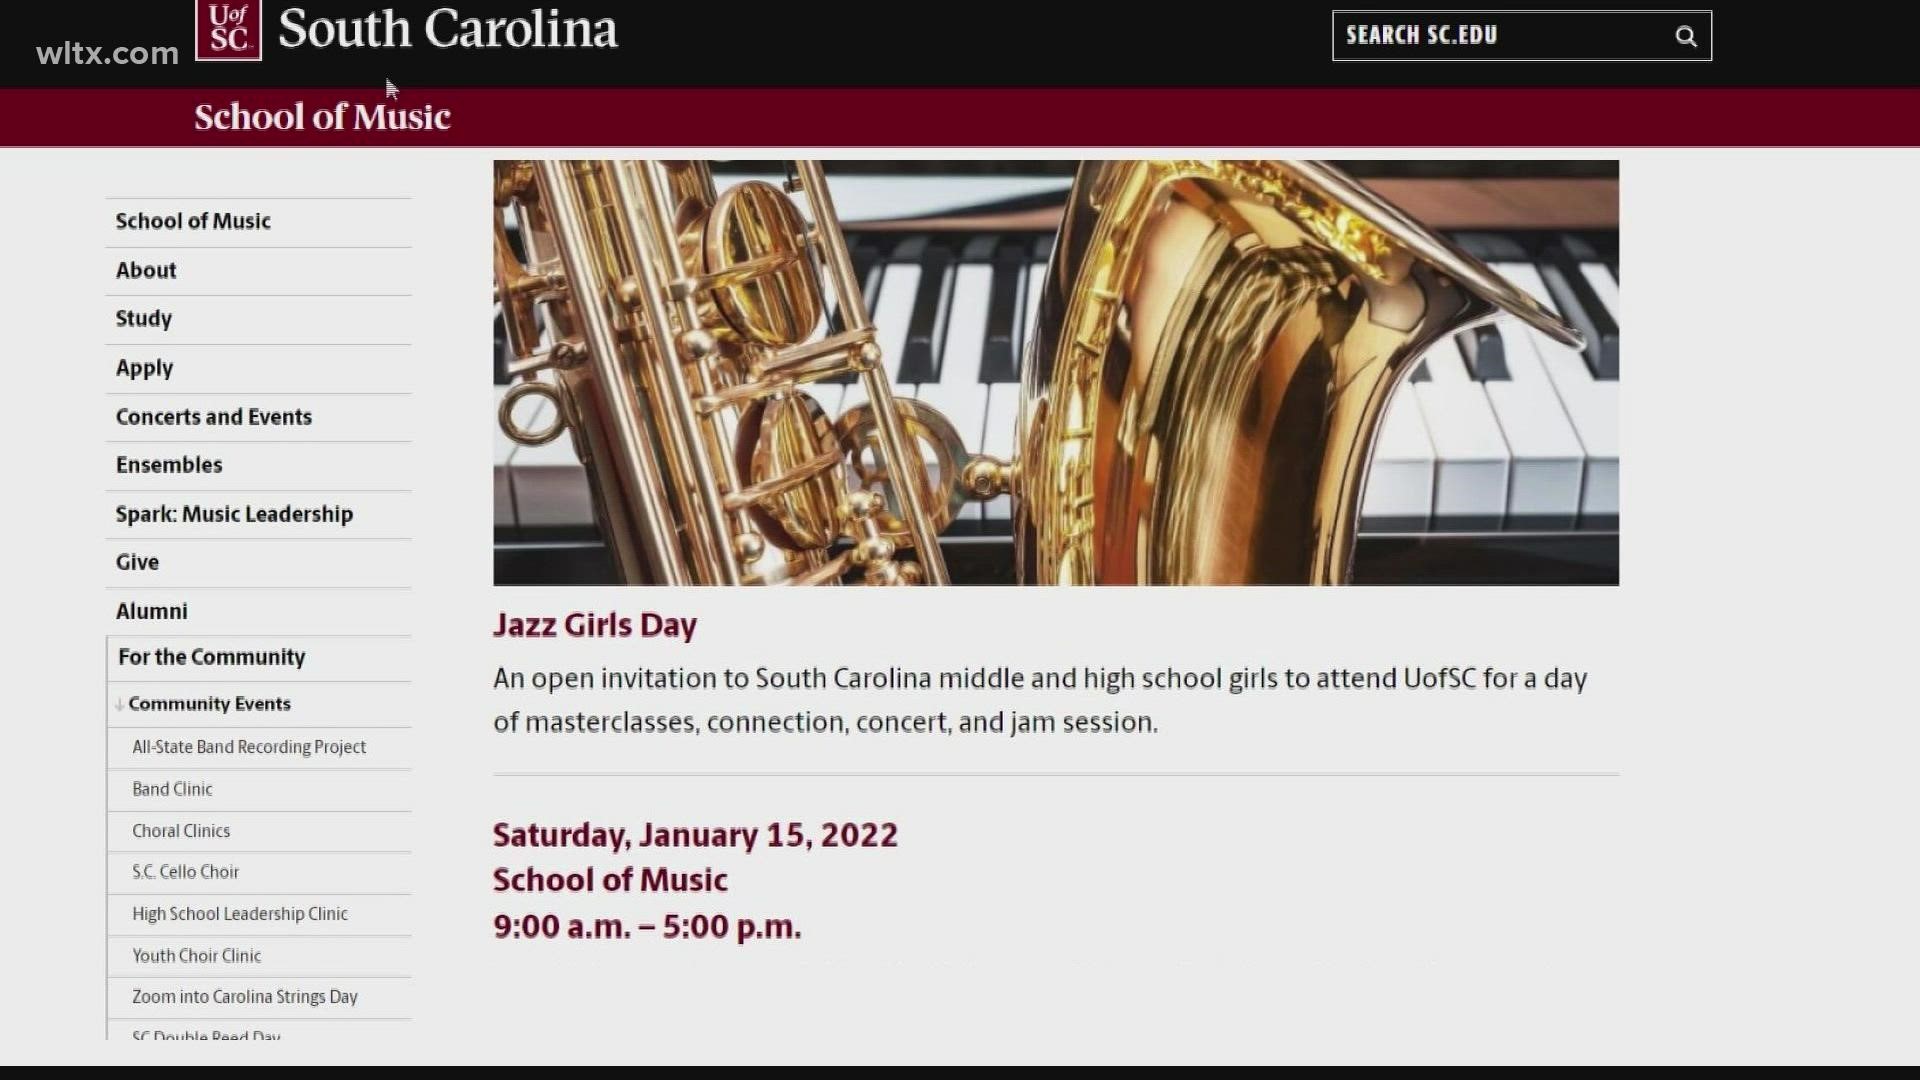 Jazz Girls Day will include learning opportunities, concerts and a jam session